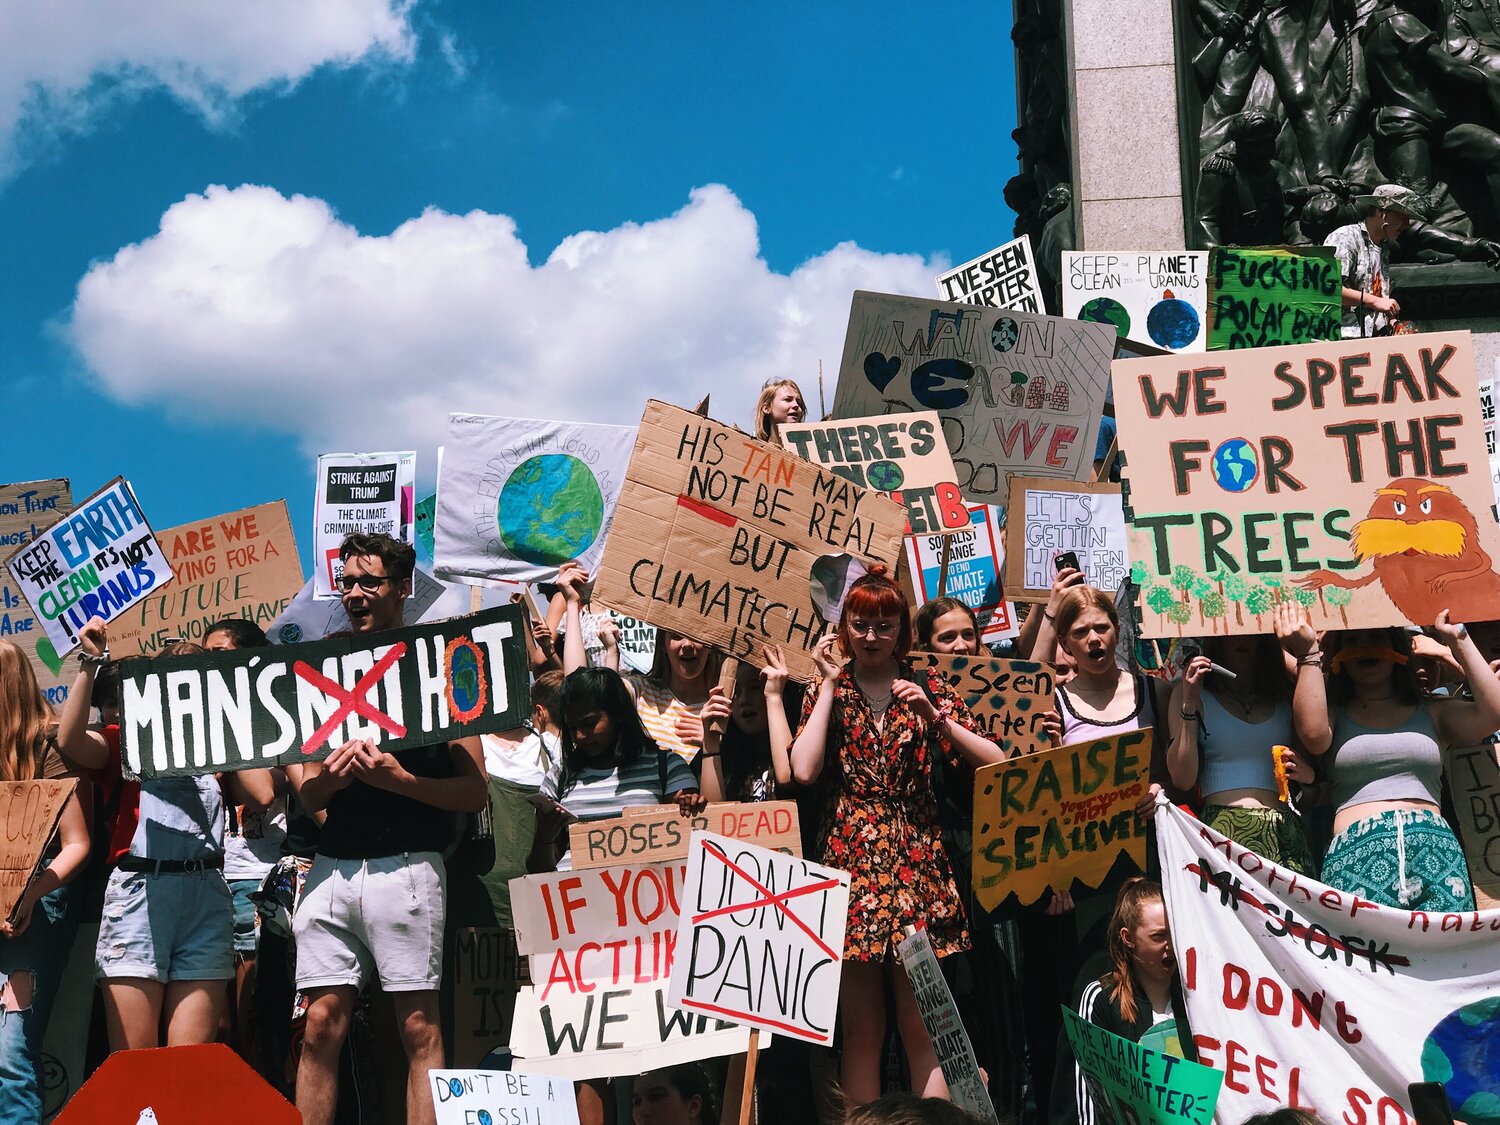 Image by Dominique PalmerYouth-led Climate Strike in May 2019